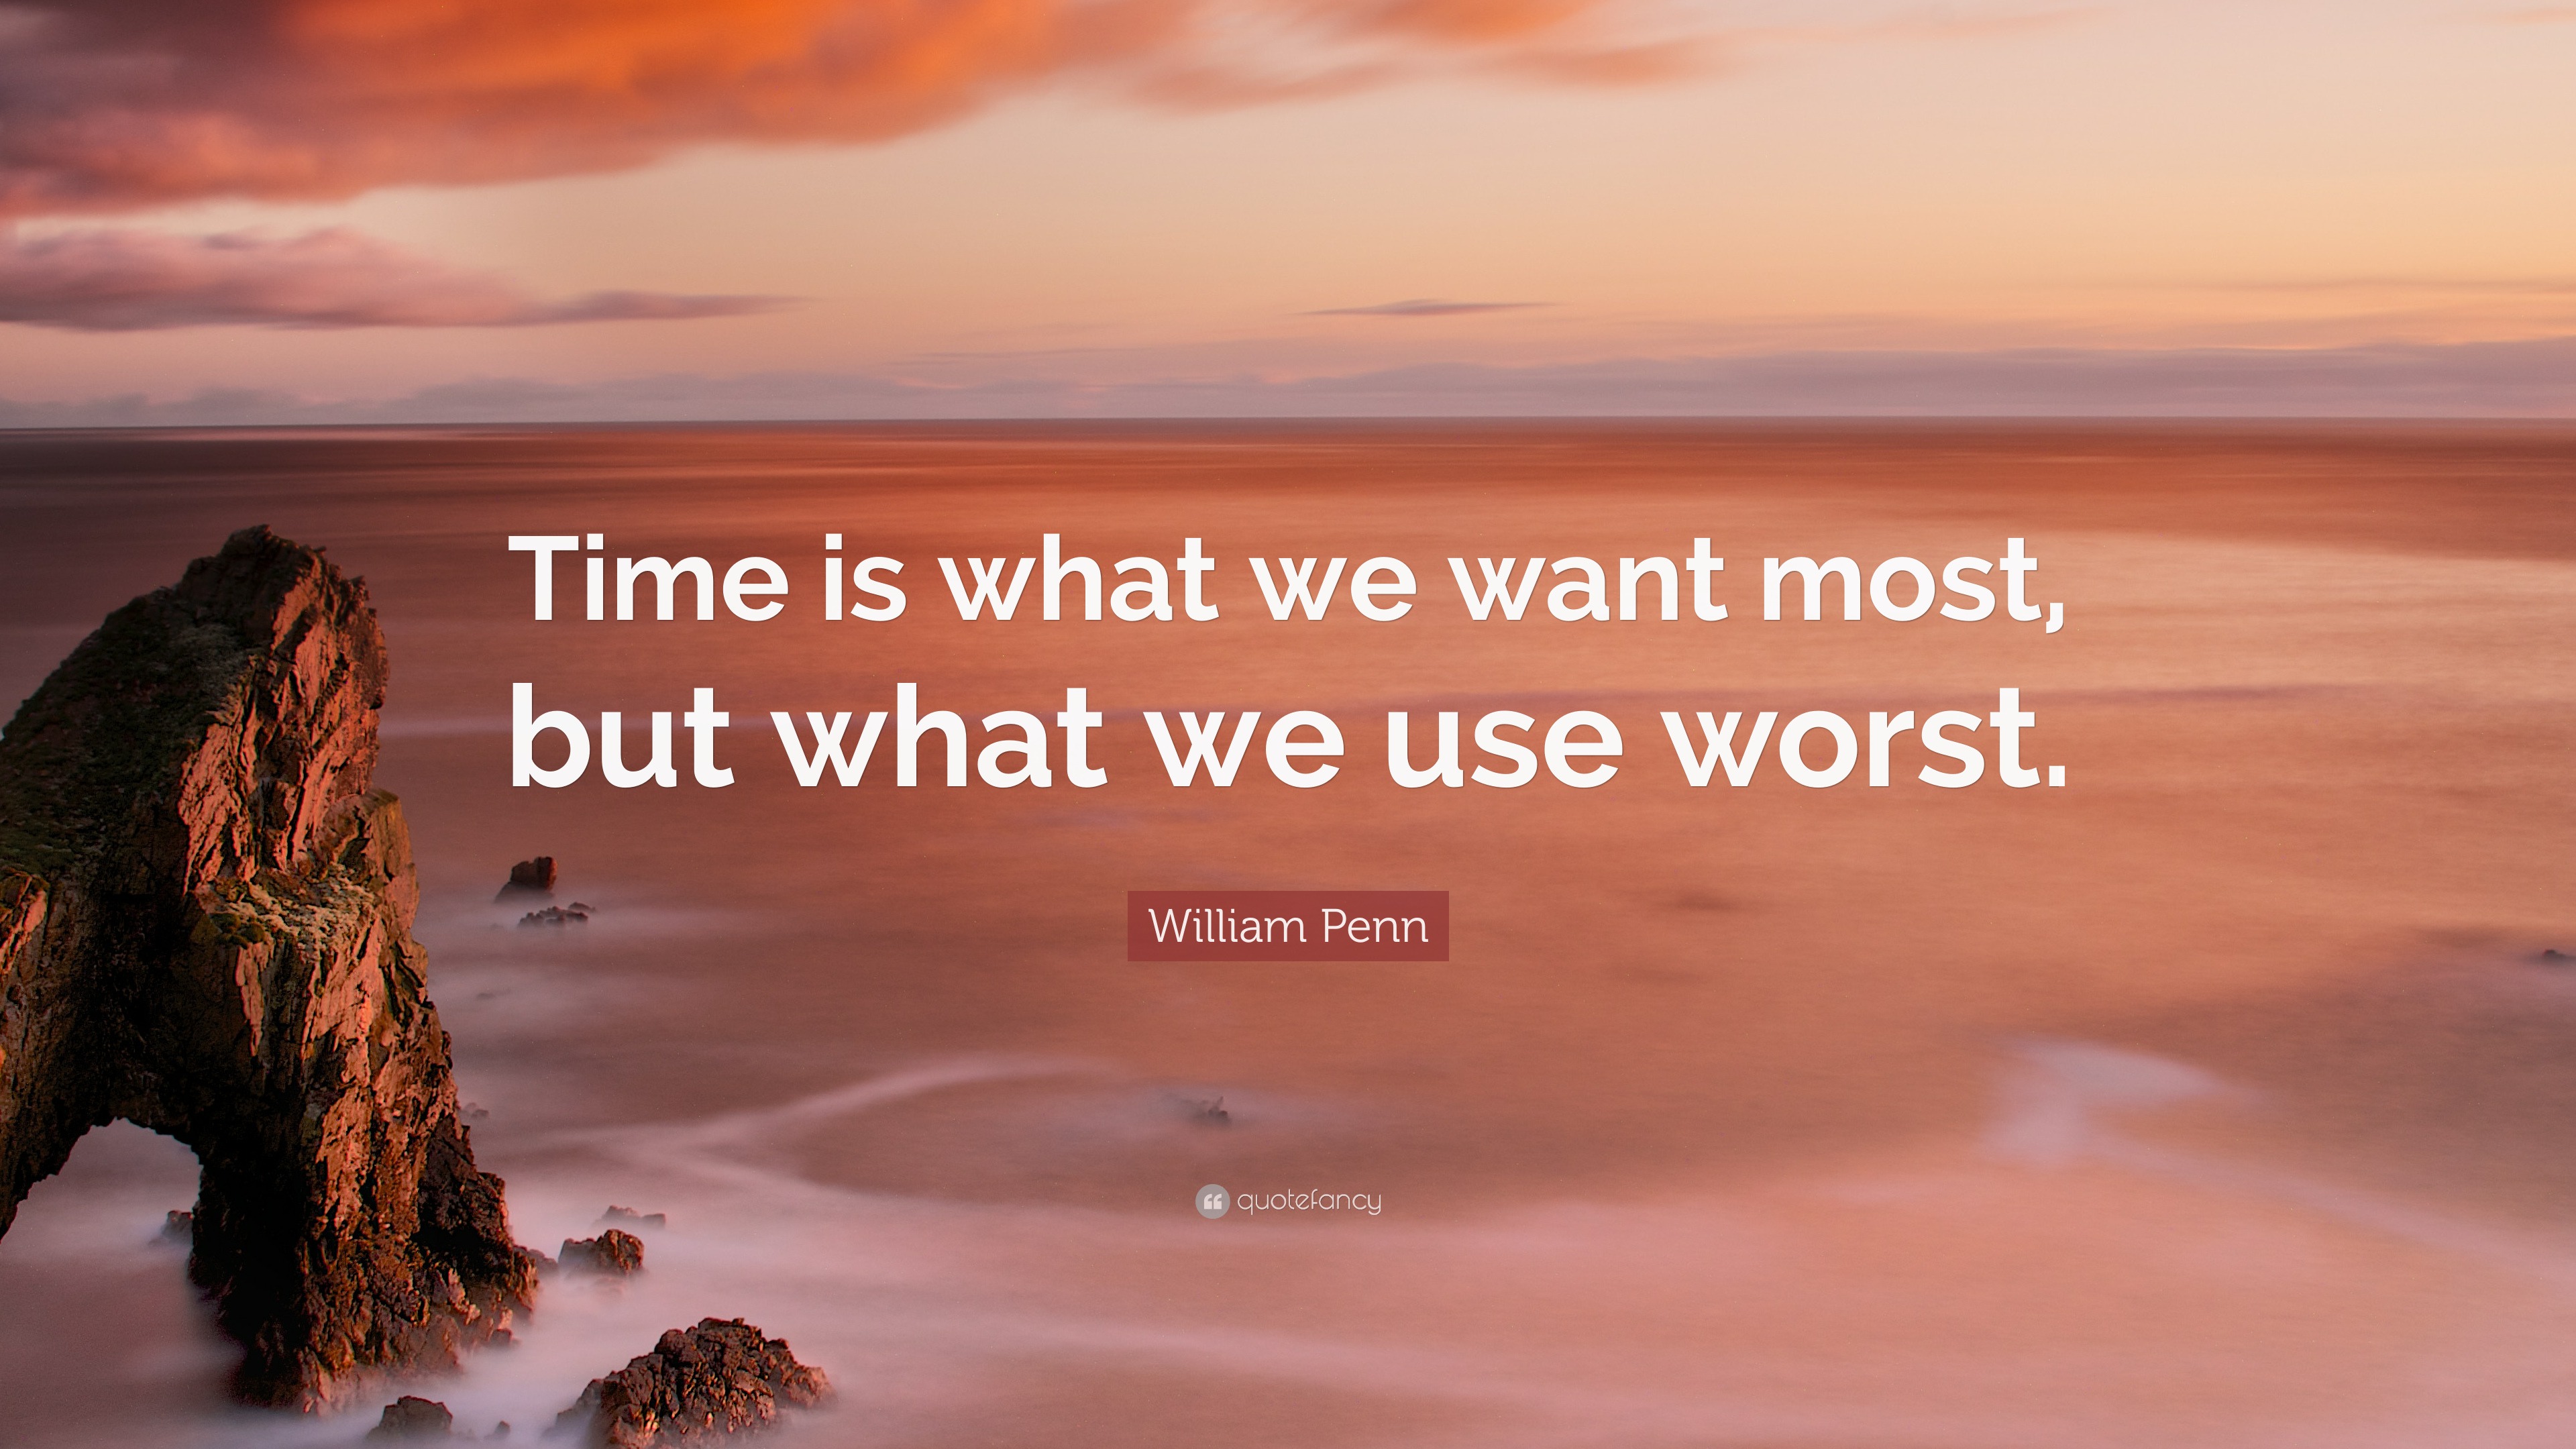 William Penn Quote: “Time is what we want most, but what we use worst